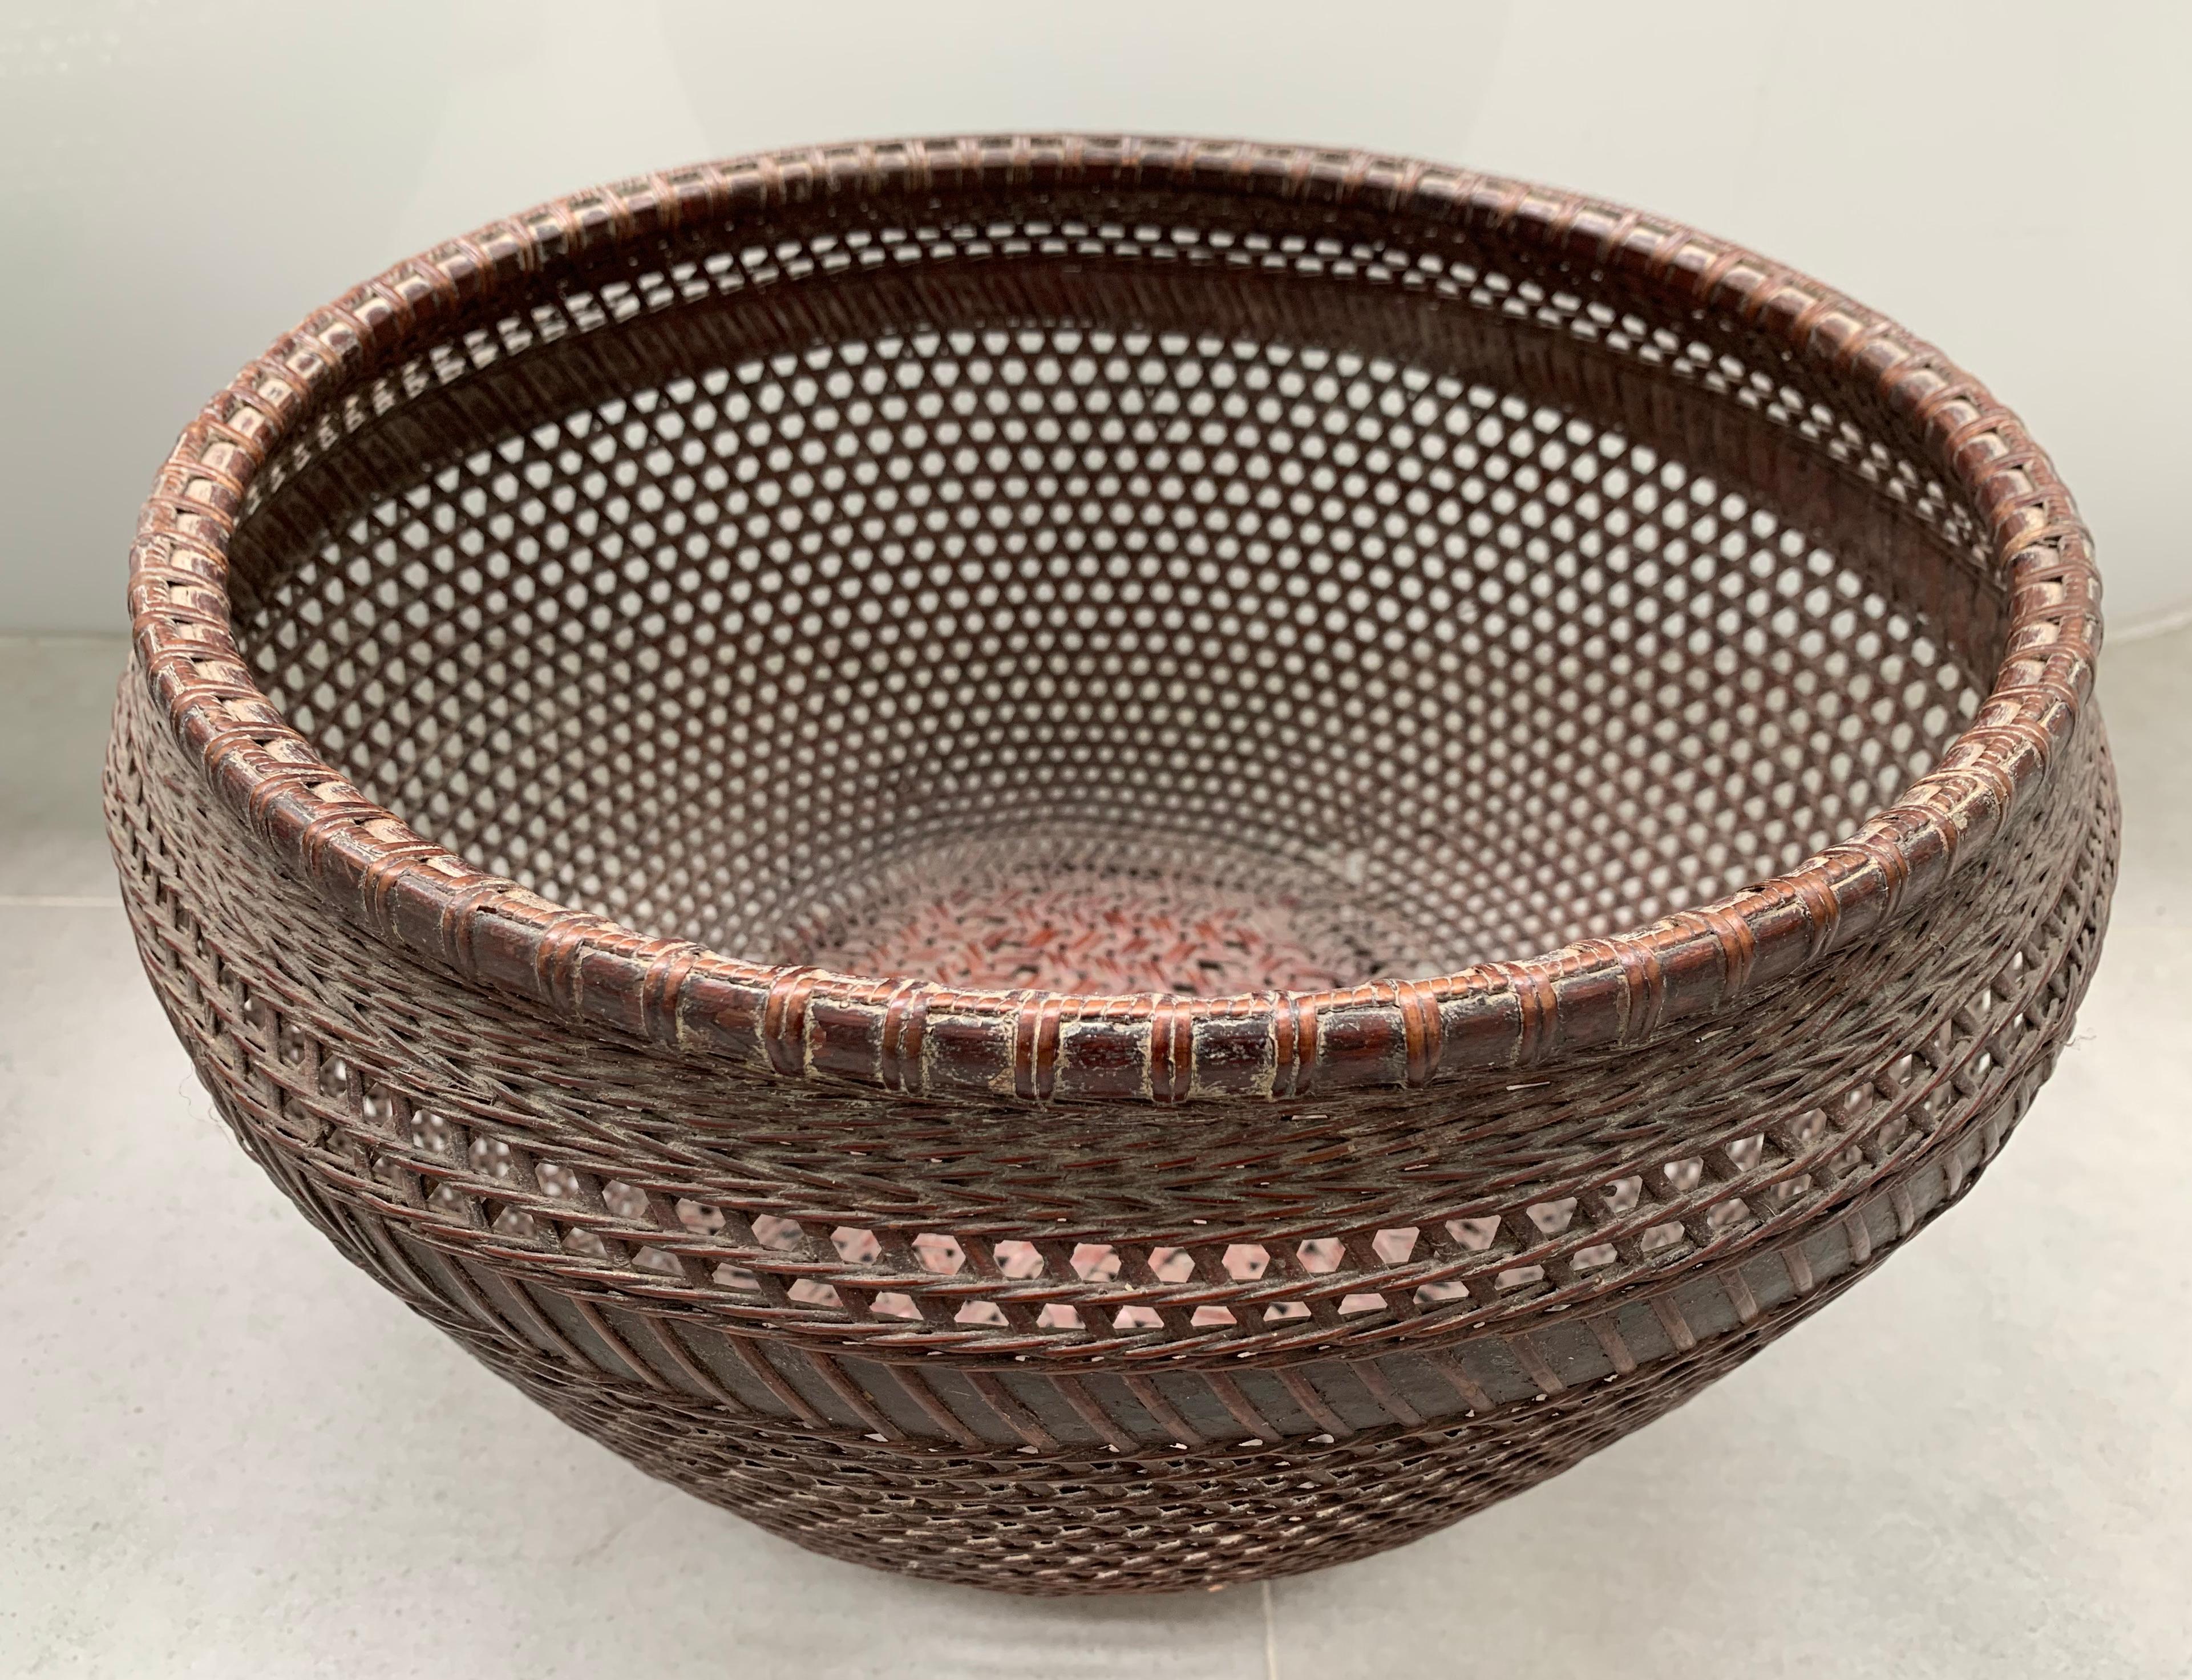 Balinese Chinese Basket Pair Hand-Woven Rattan with Red Wood Base, Early 20th Century For Sale